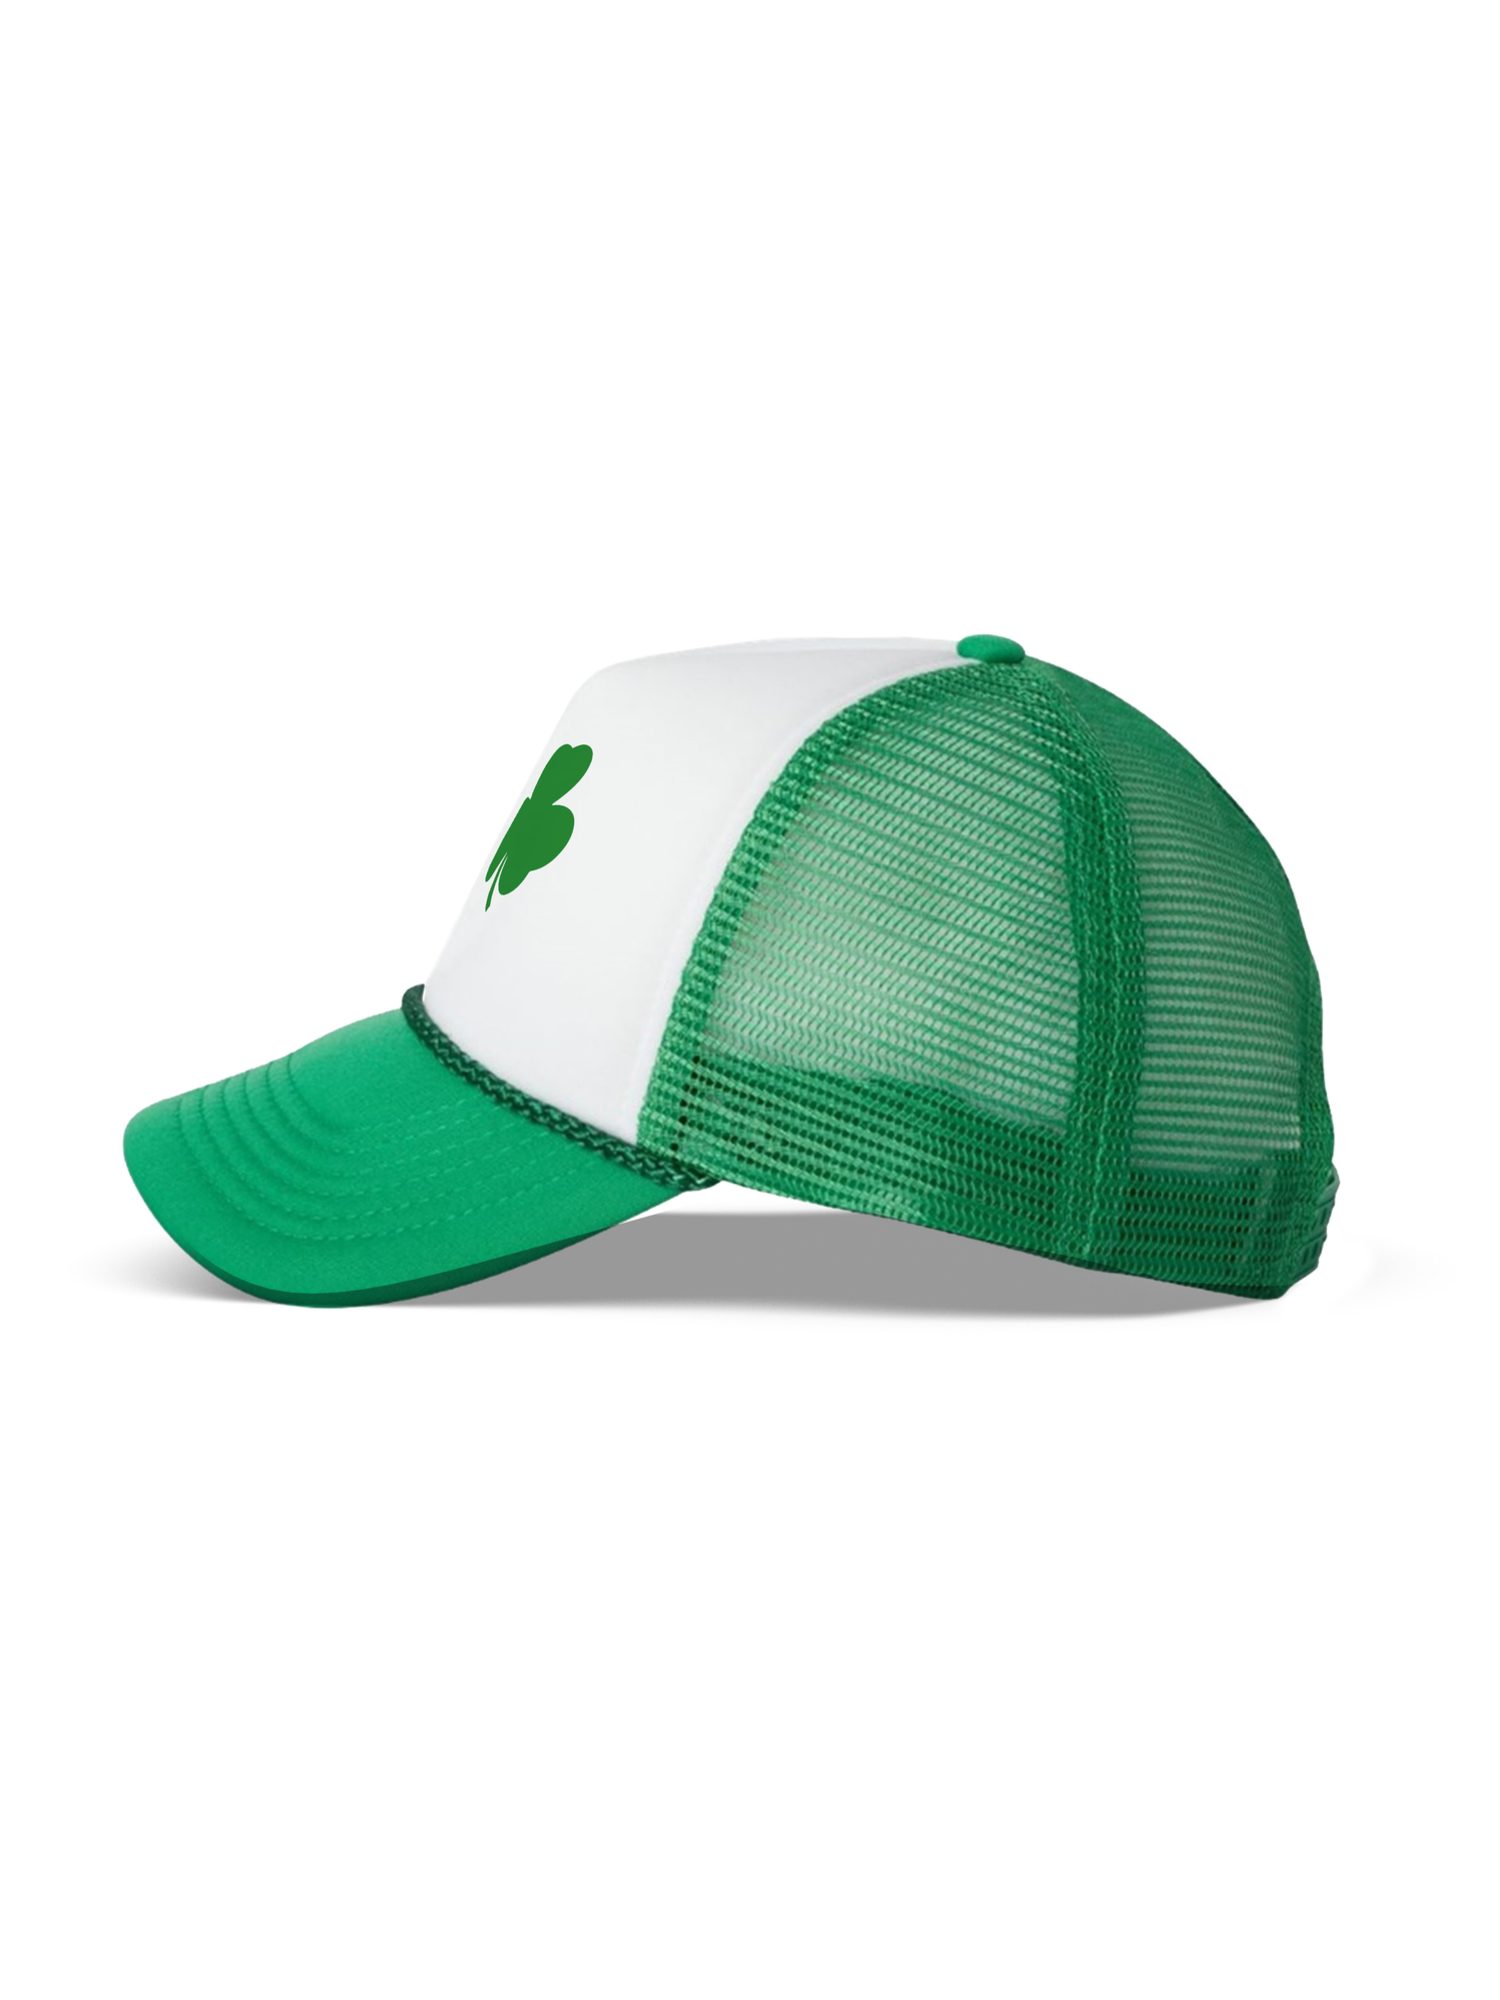 Awkward Styles St. Paddy's Day Trucker Hats for St. Patrick's Day Celebration Vintage Style Retro Mesh Cap Gift St. Patrick Top Hat Green Hat Gift for Him Gift for Her St. Patrick's Day Accessories - image 3 of 6